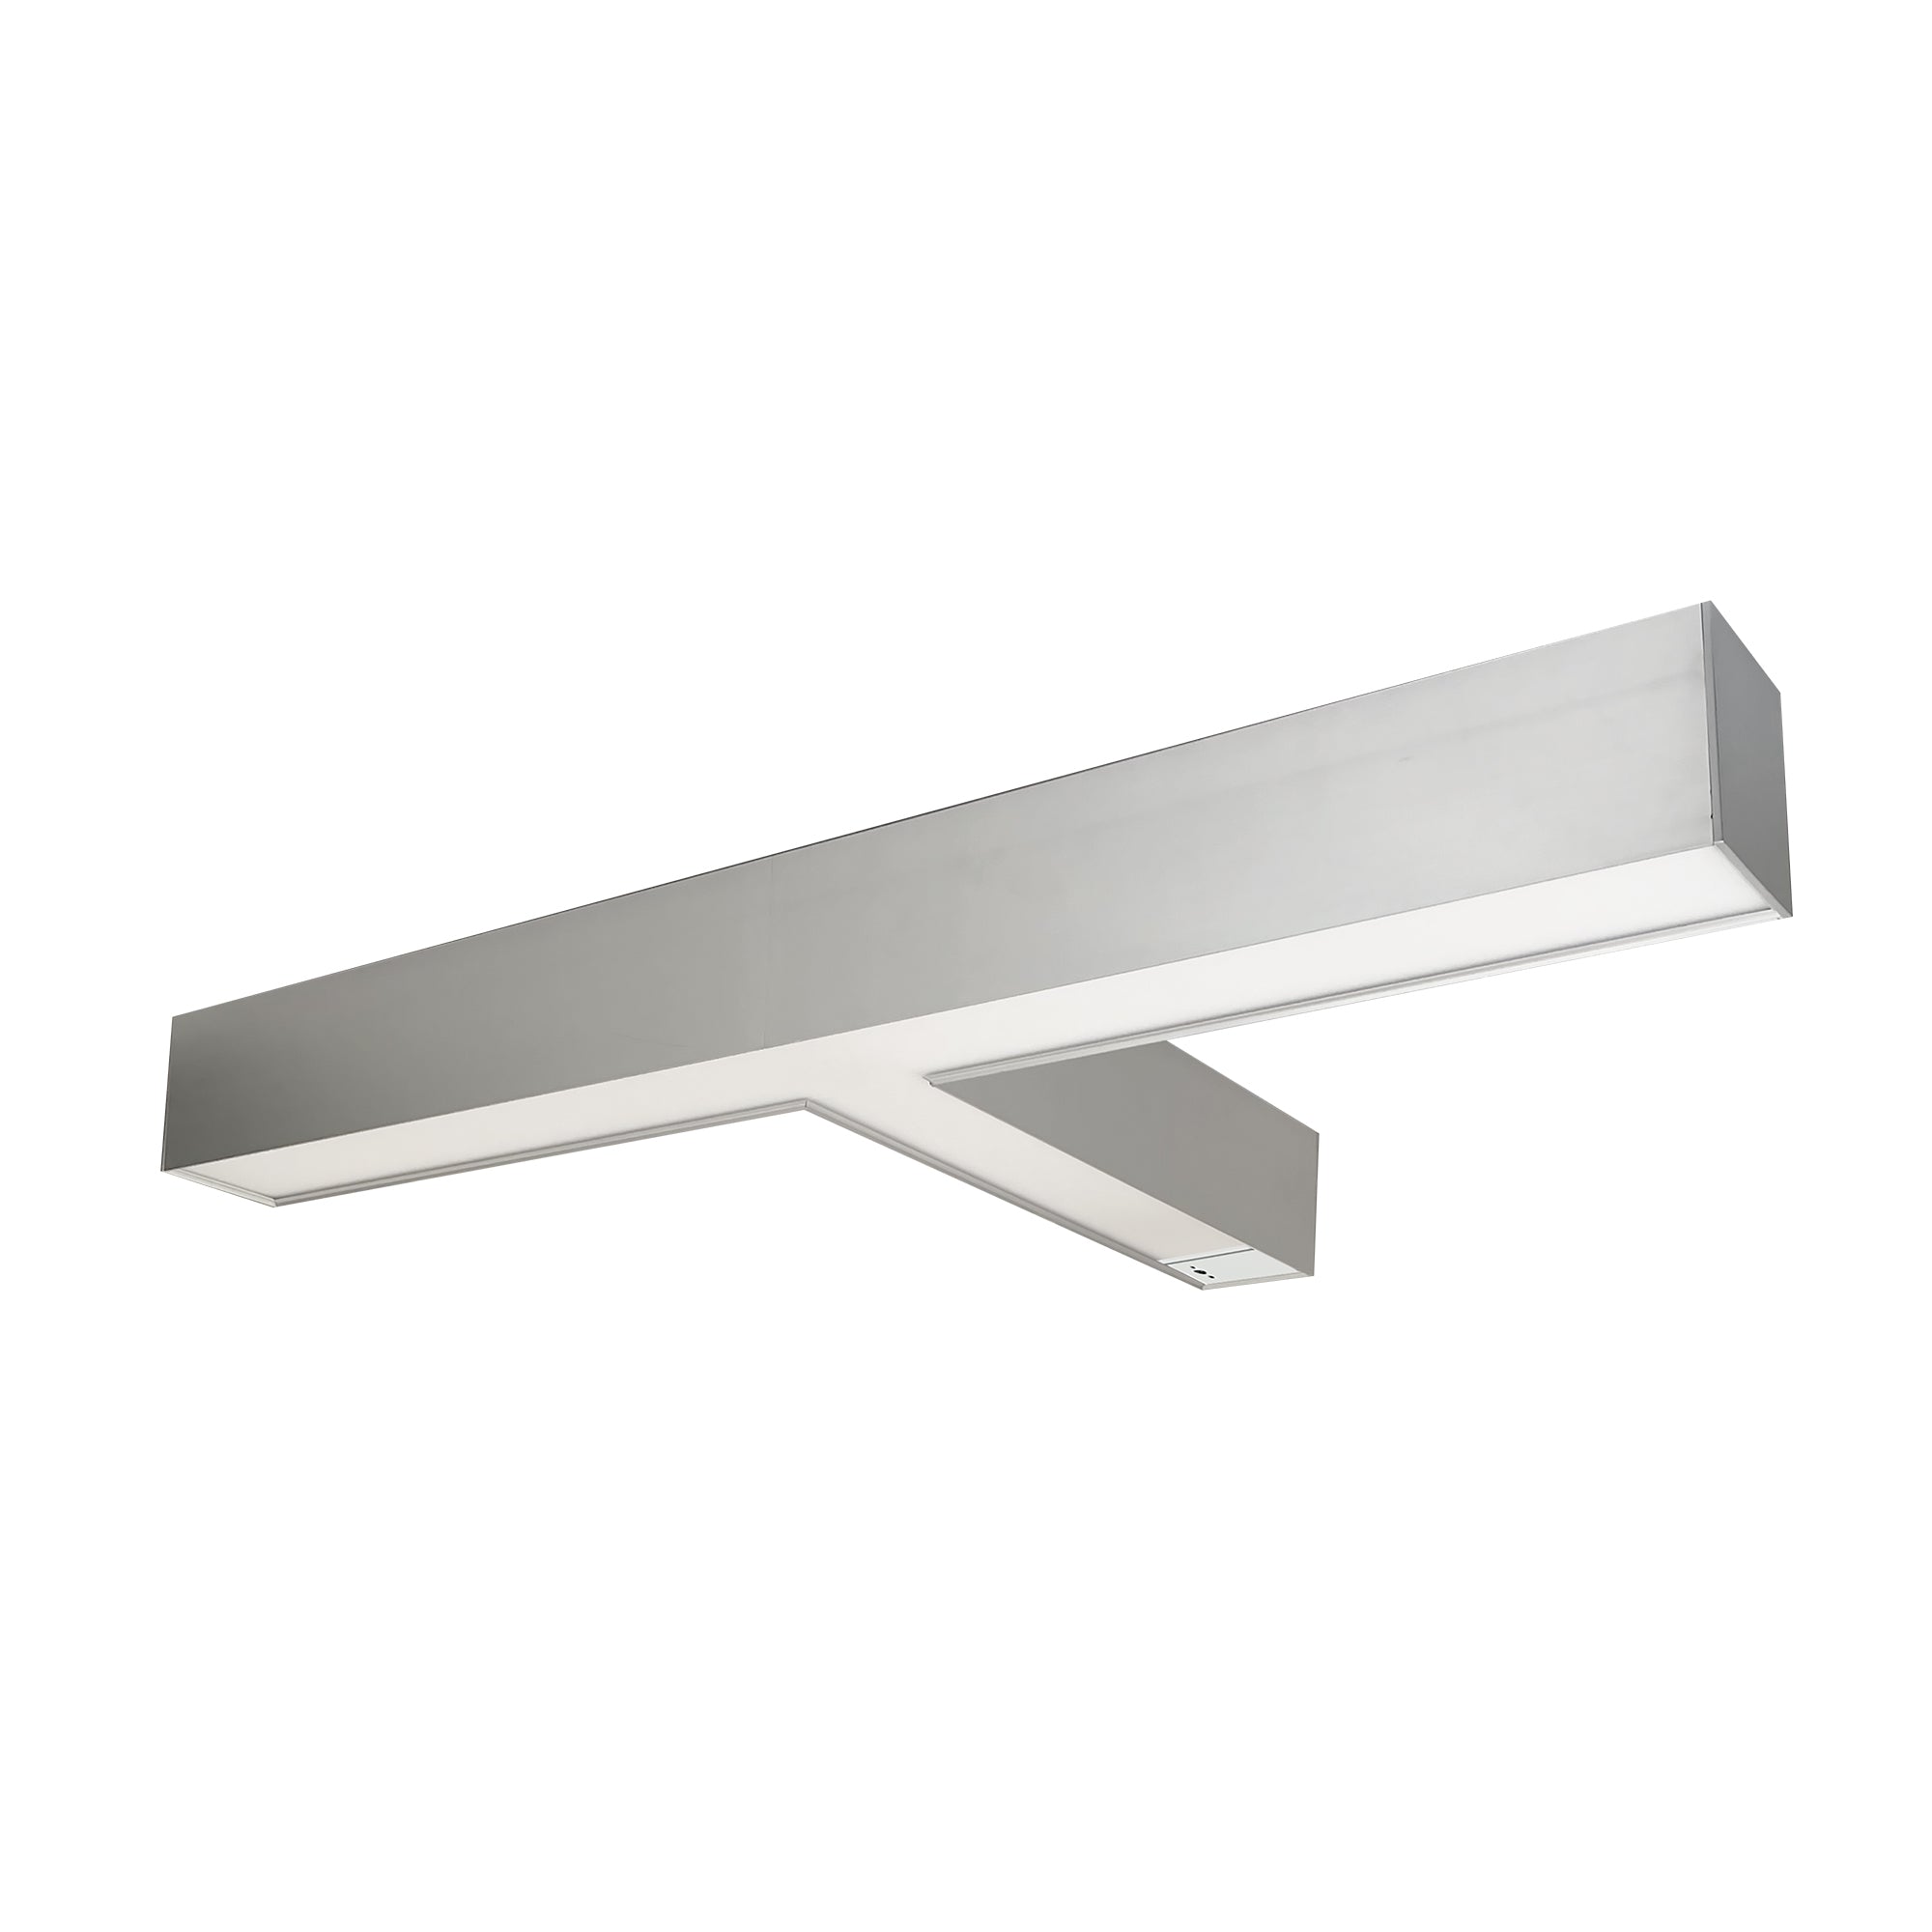 Nora Lighting NLUD-T334A/OS - Linear -  InchT Inch Shaped L-Line LED Indirect/Direct Linear, 5027lm / Selectable CCT, Aluminum Finish, with Motion Sensor